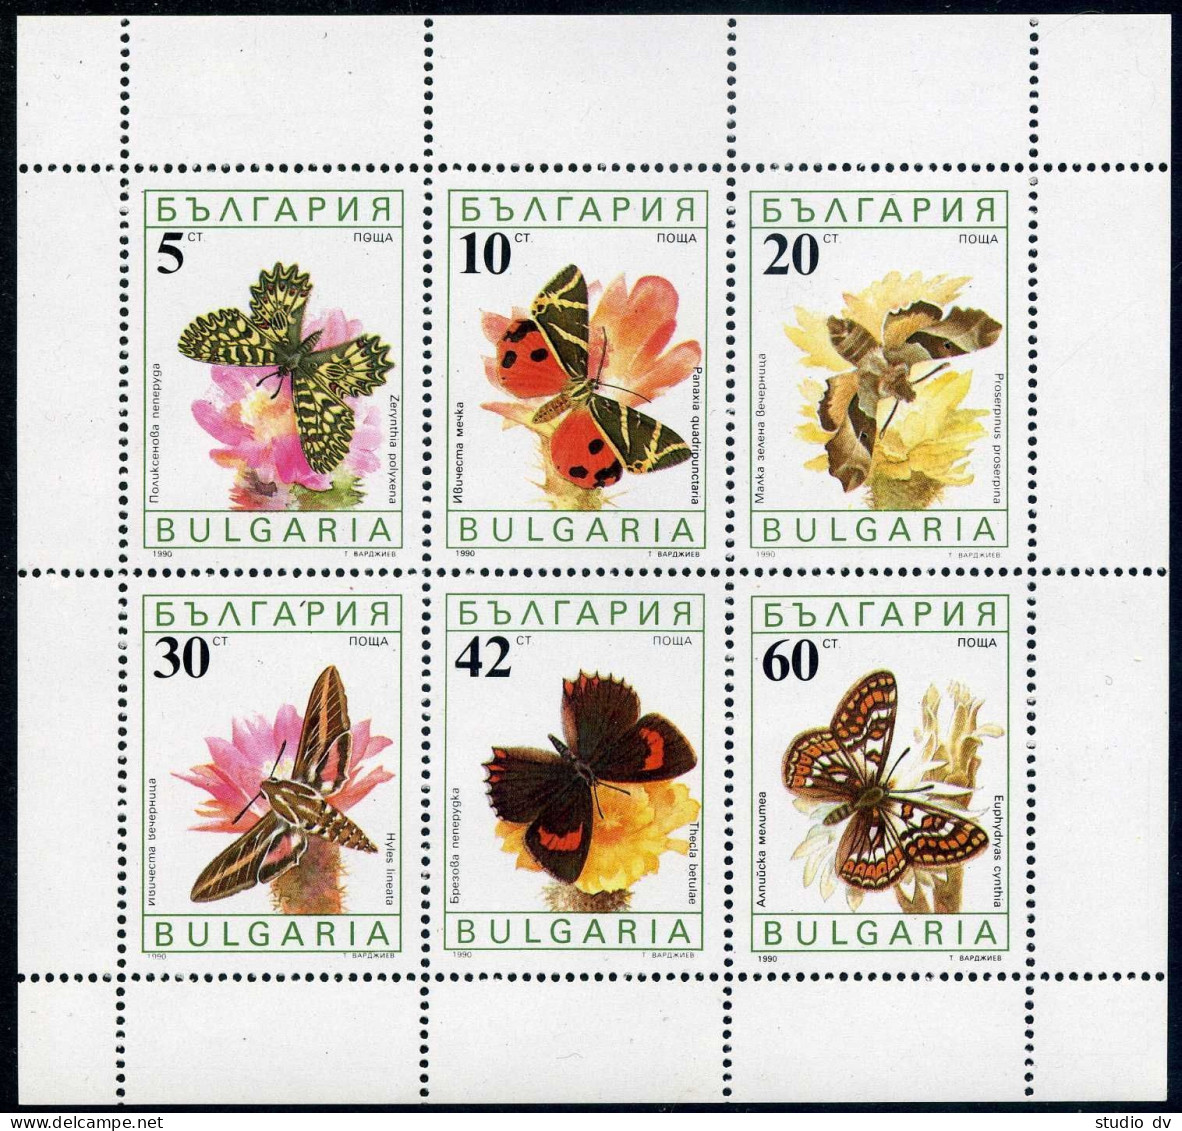 Bulgaria 3556a Sheet,MNH.Michel 3852-3857 Klb. Butterflies And Flowers 1990. - Unused Stamps